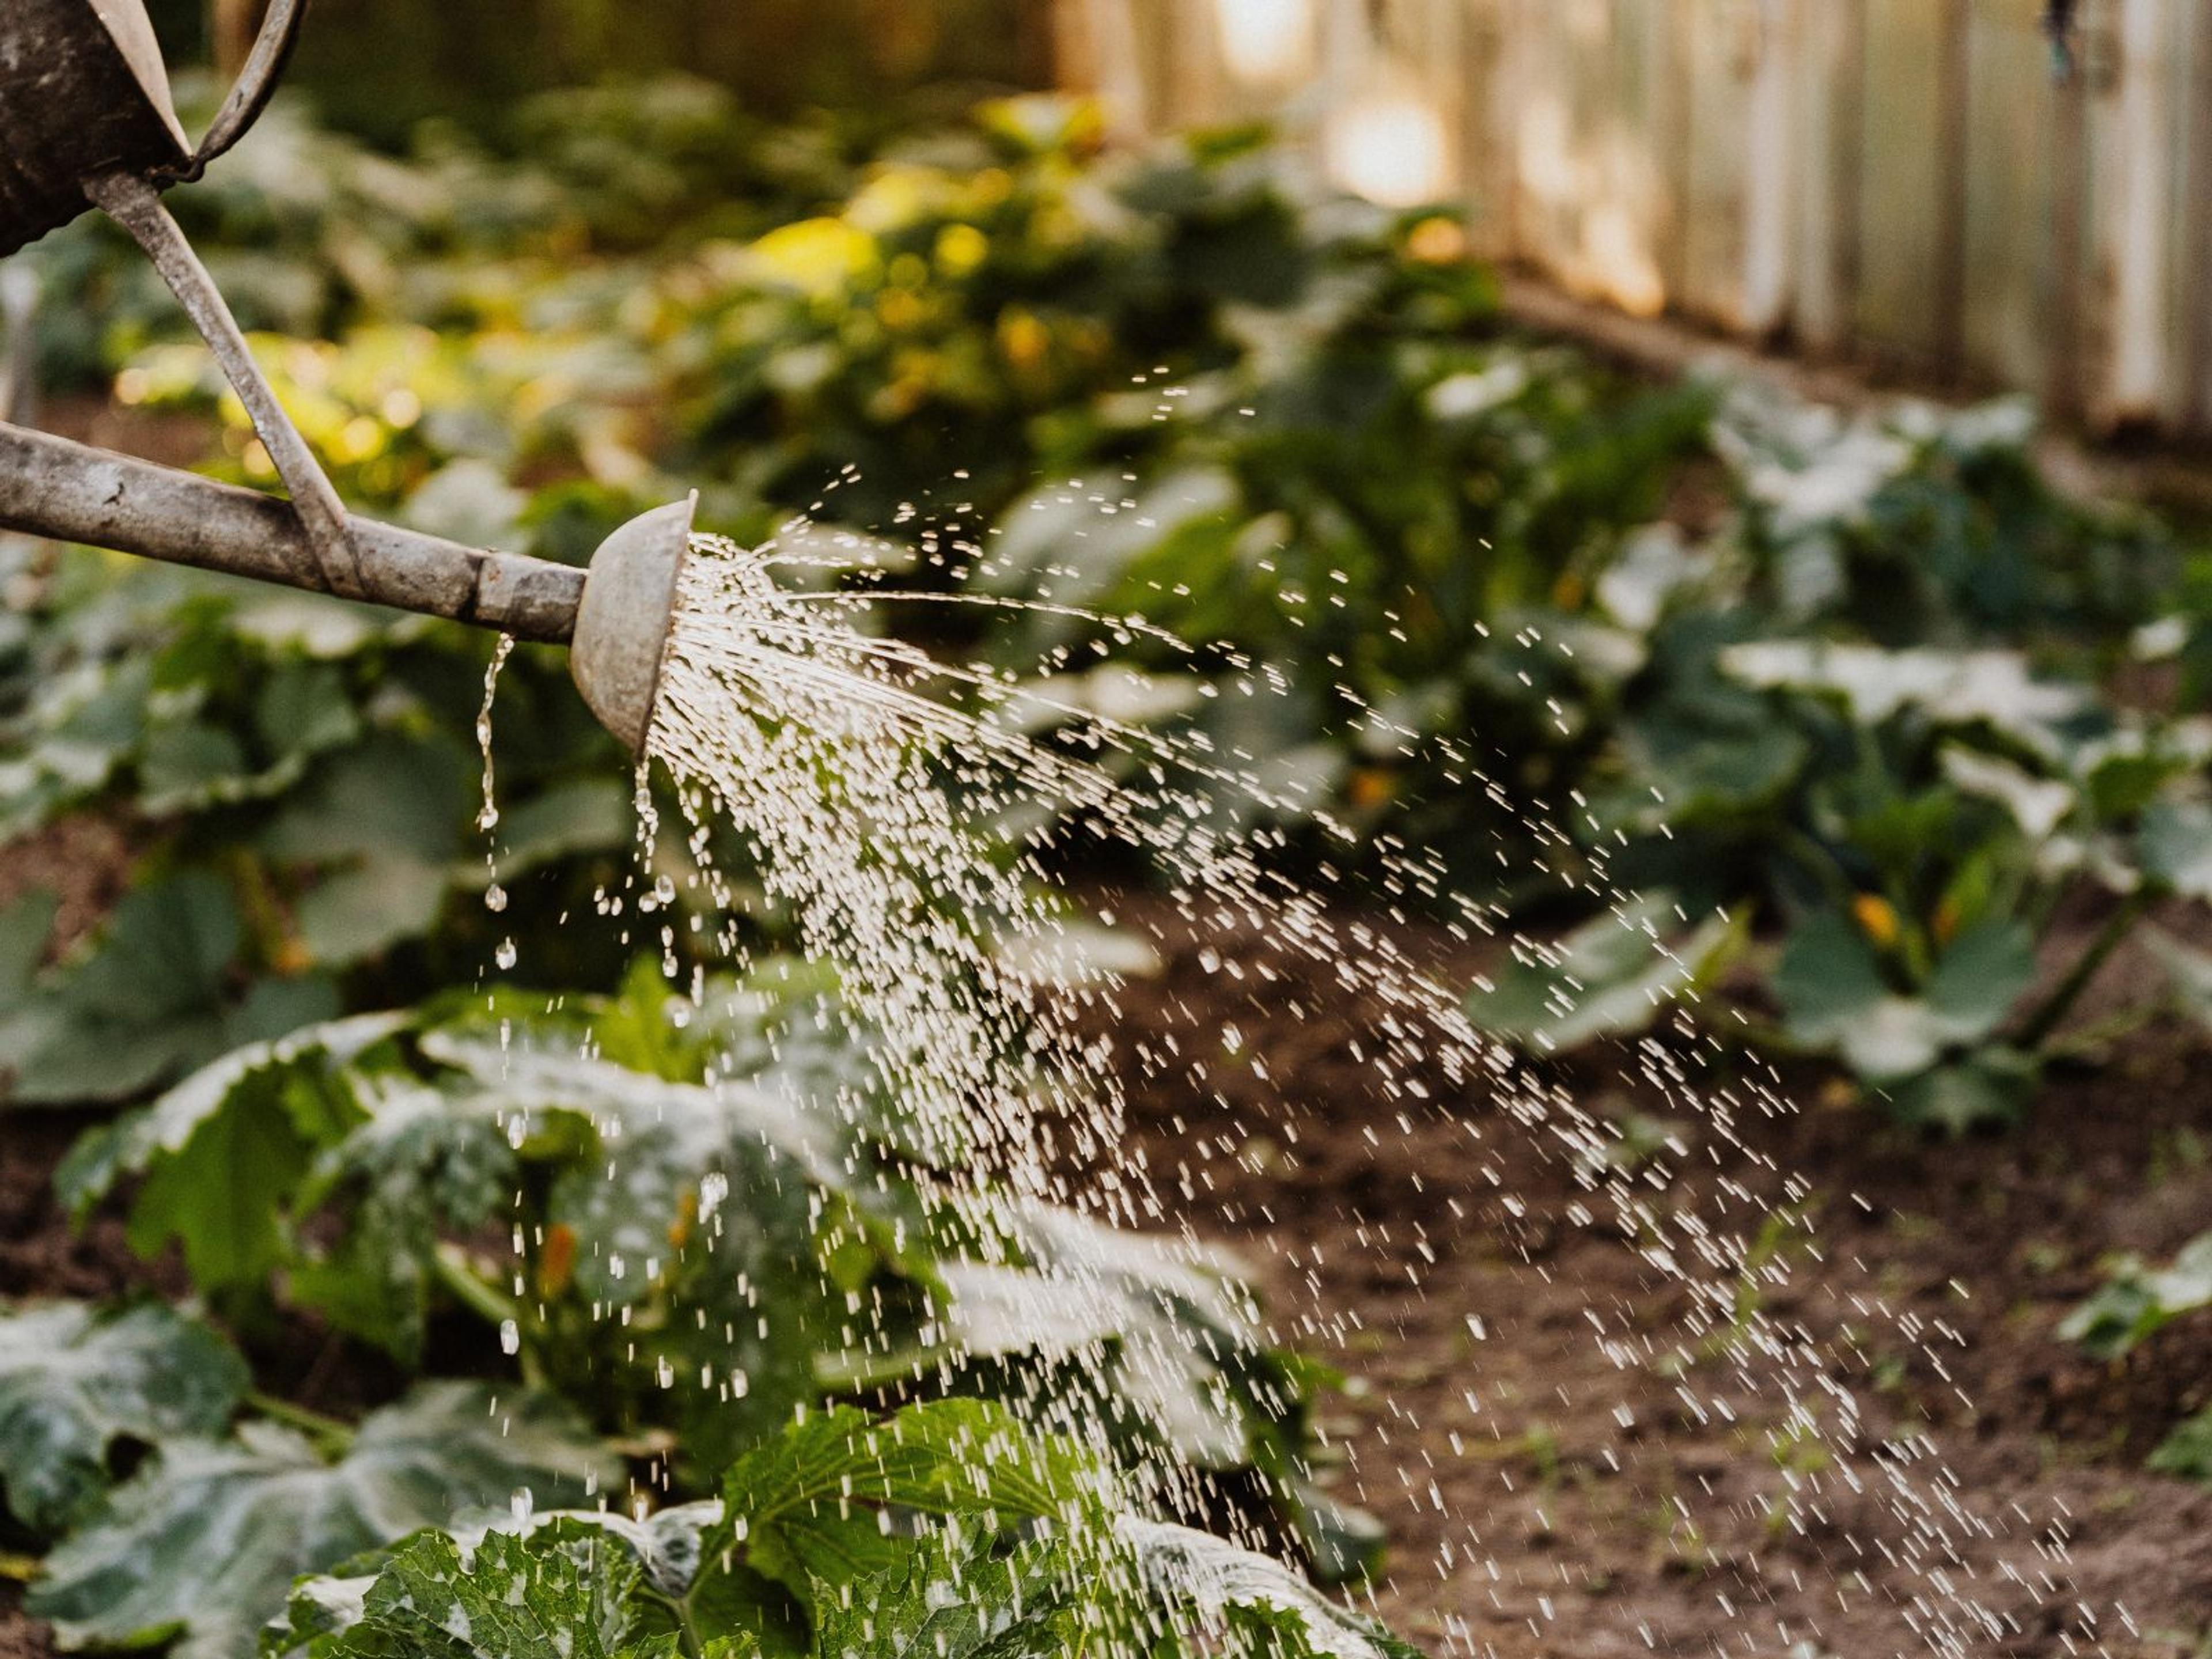 A metal watering can watering some rows of plants.